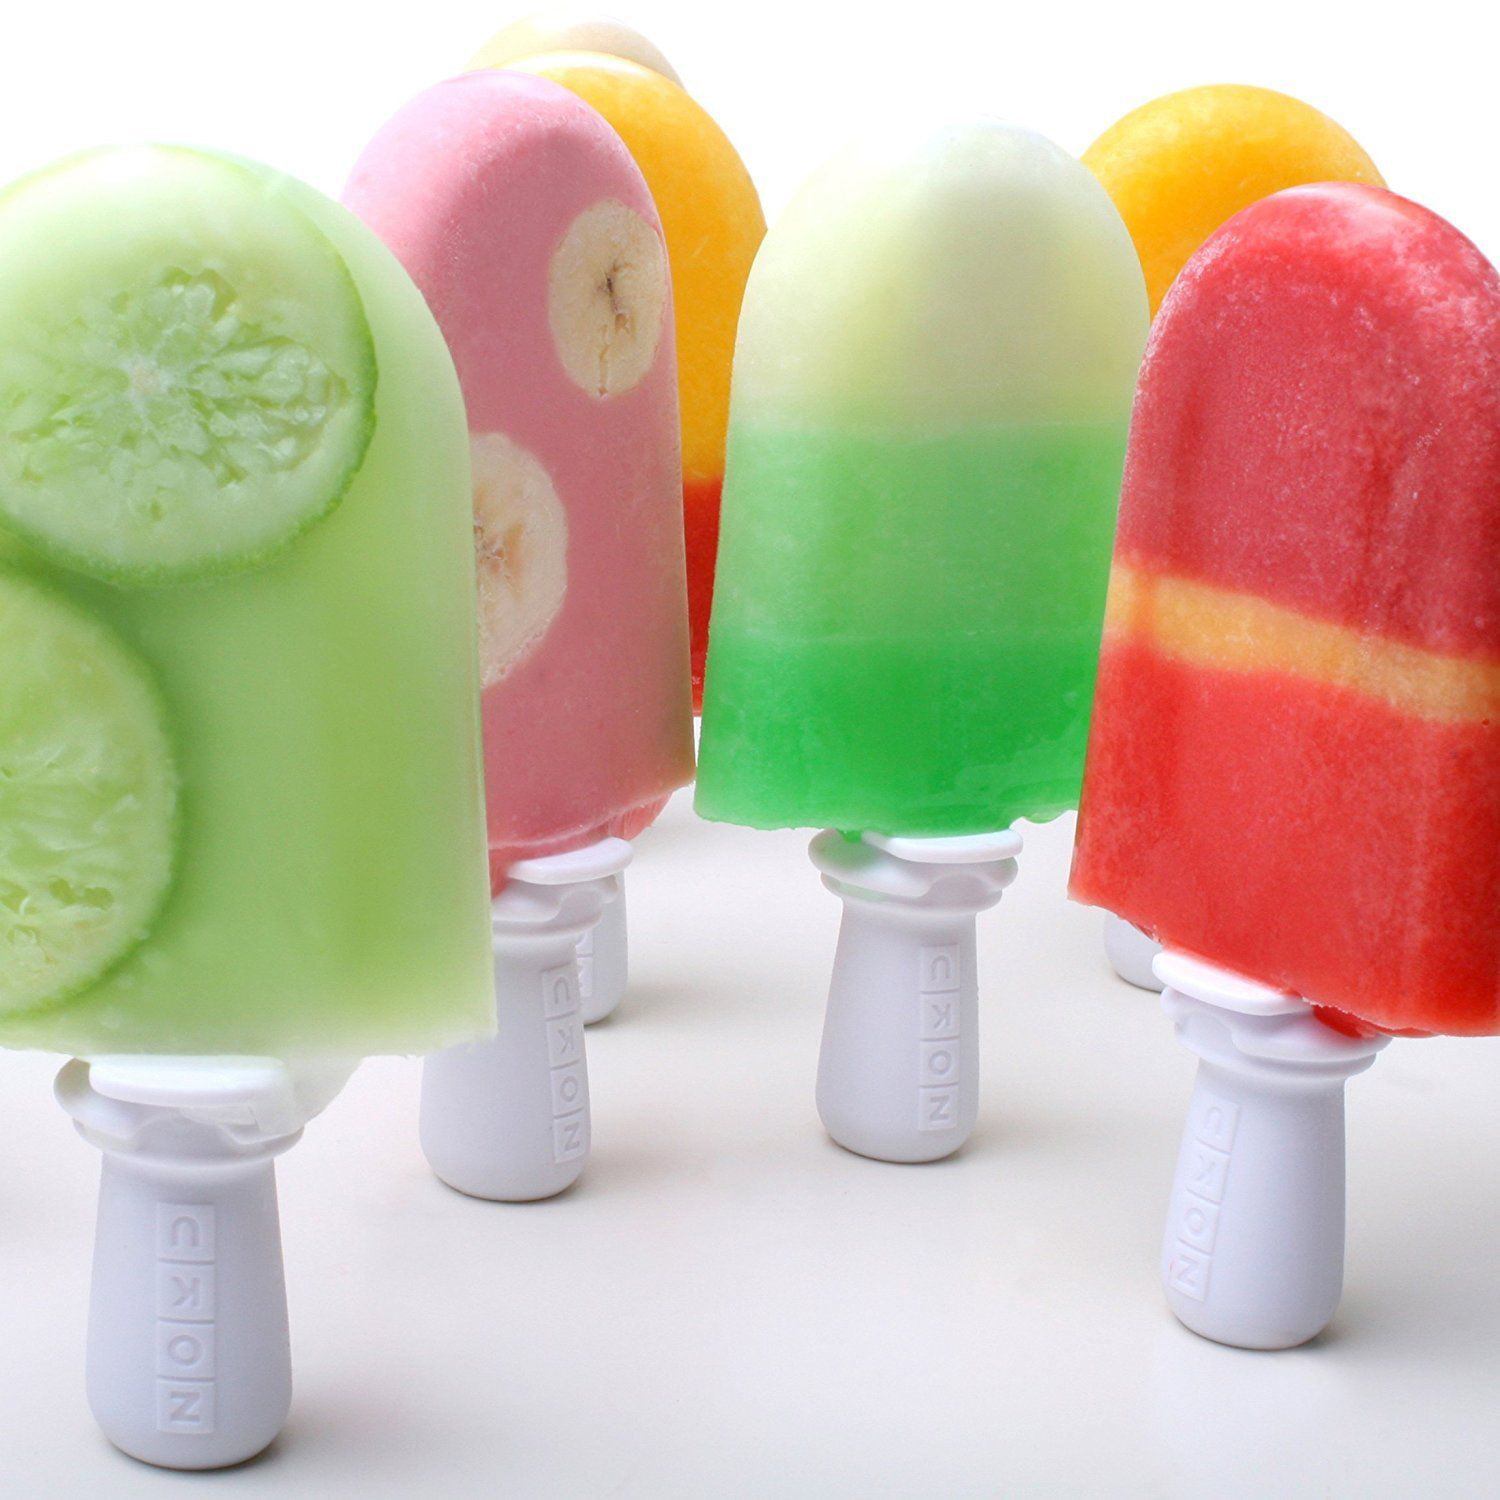 Zoku Quick Pop Maker Shapes Your Icy Treats In Just Seven Minutes